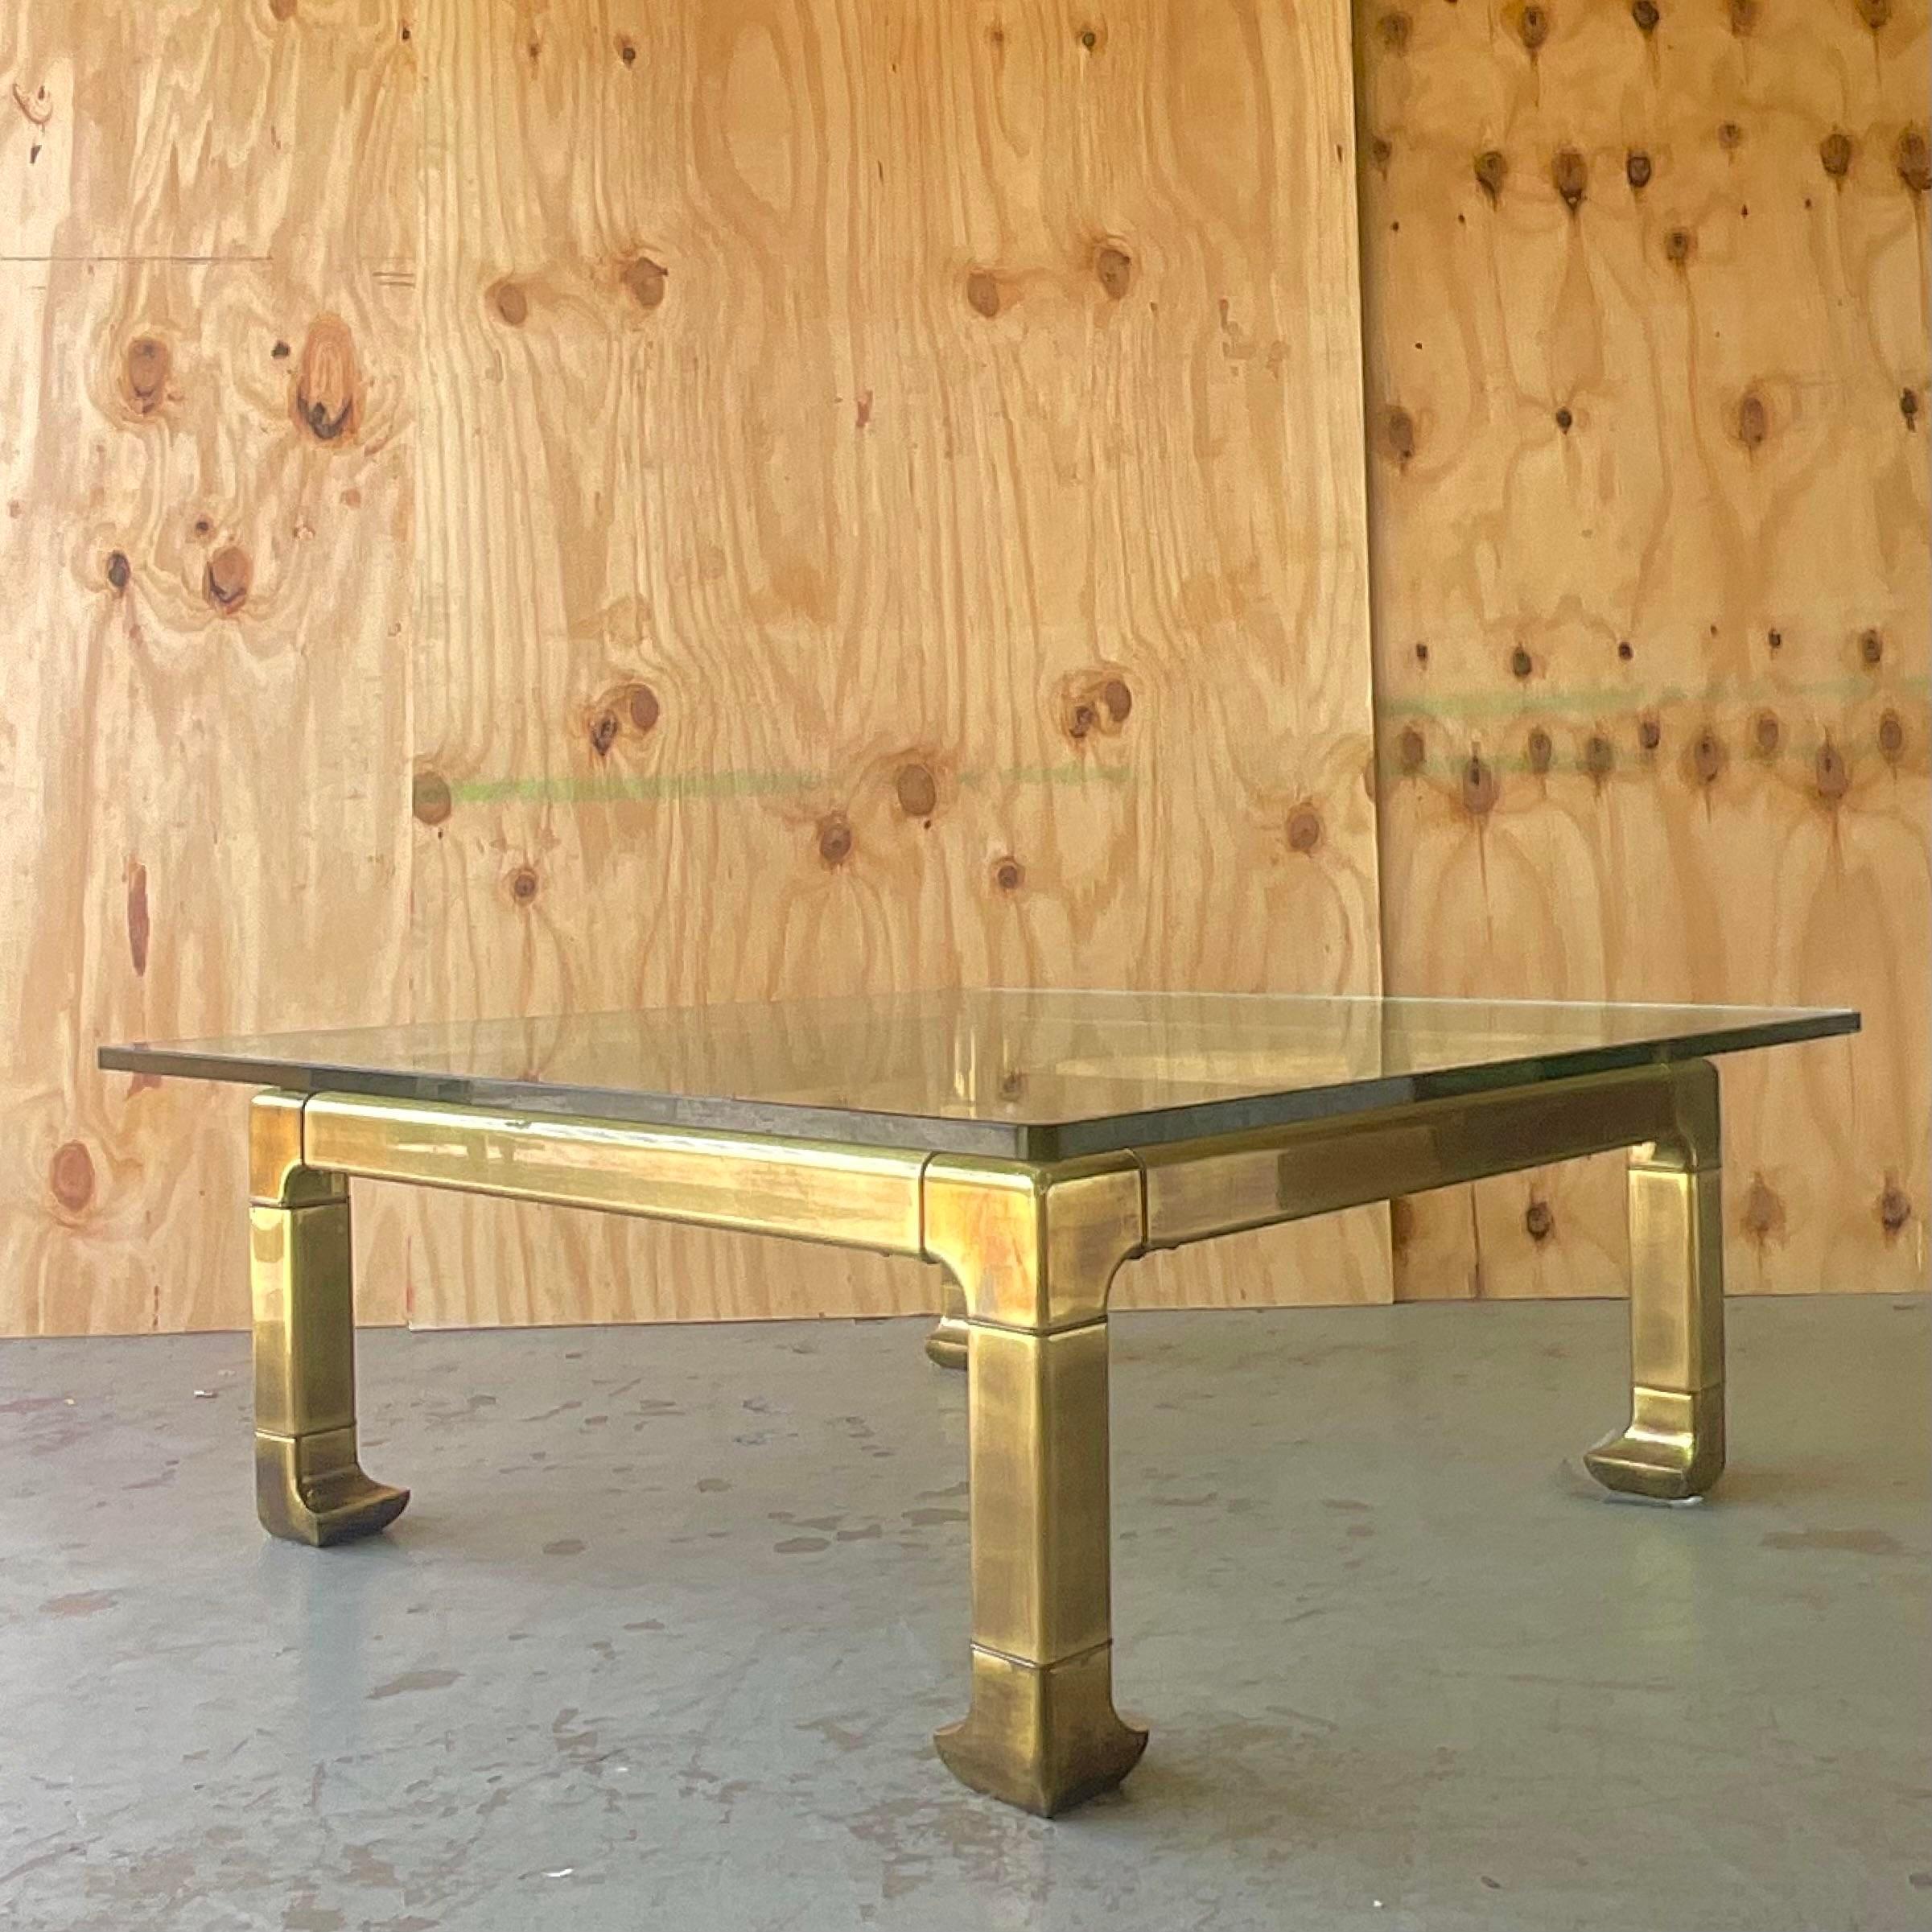 A stunning vintage Regency coffee table. A chic brass frame with thick glass top done in the manner of Mastercraft. Acquired from a Palm Beach estate. 